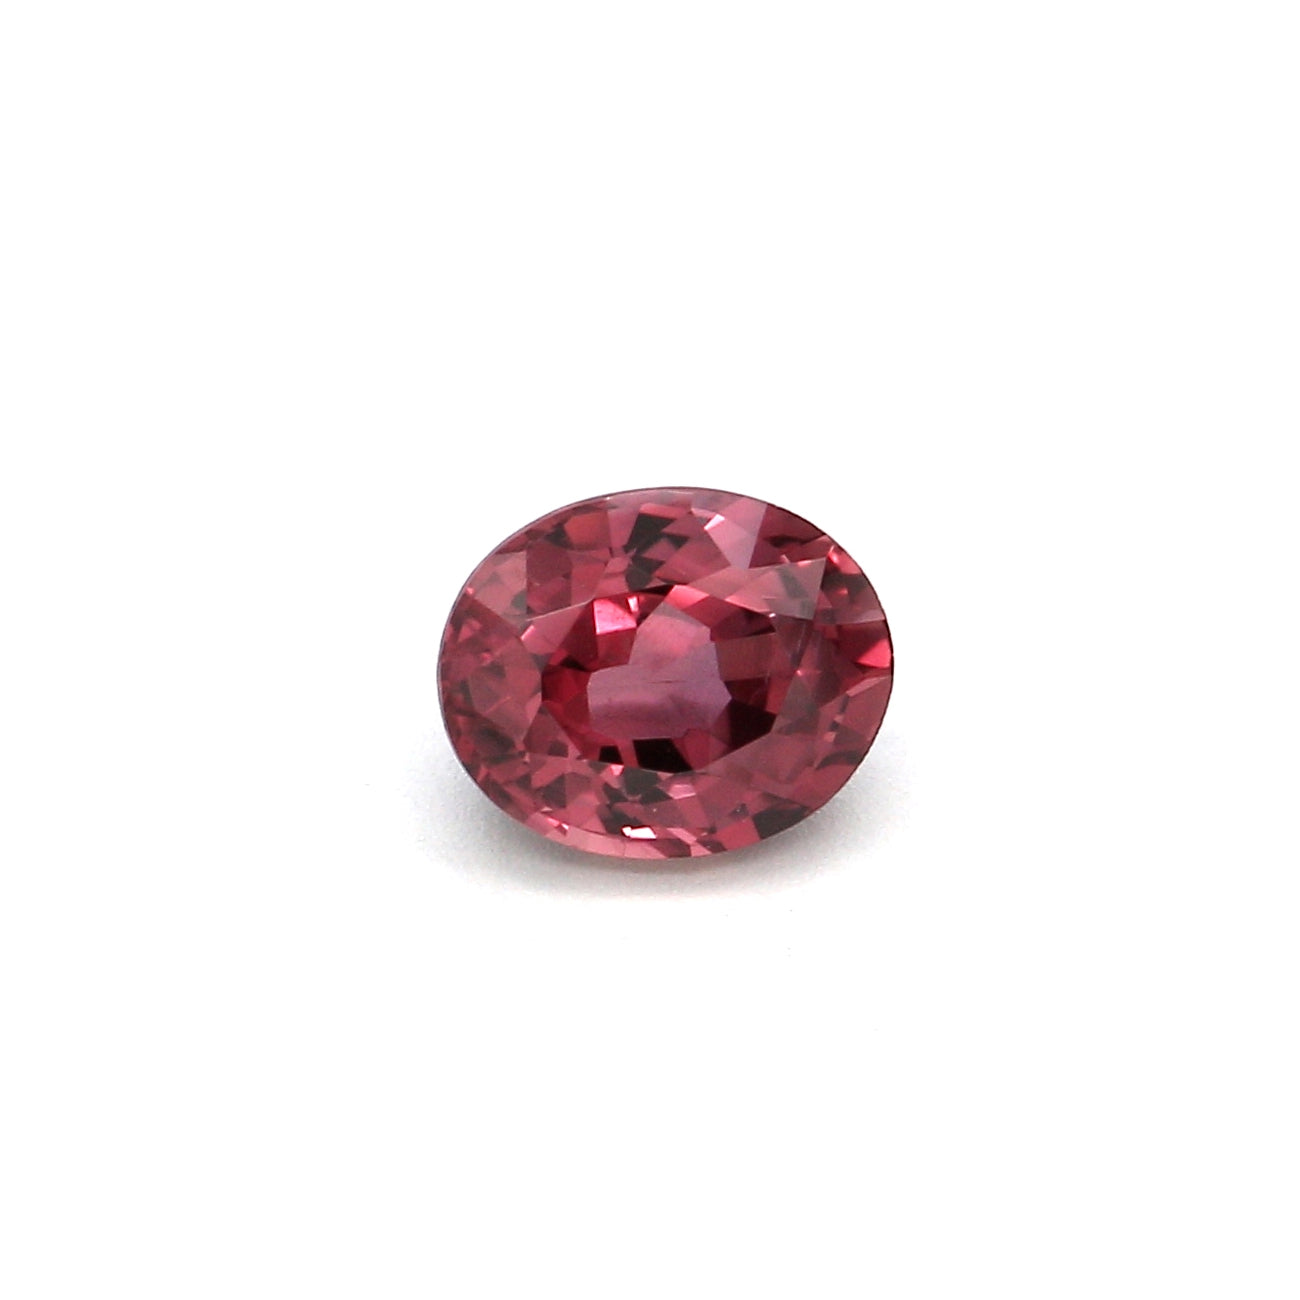 0.51ct Orangy Pink, Oval Sapphire, Heated, Mozambique - 5.01 x 4.11 x 2.86mm